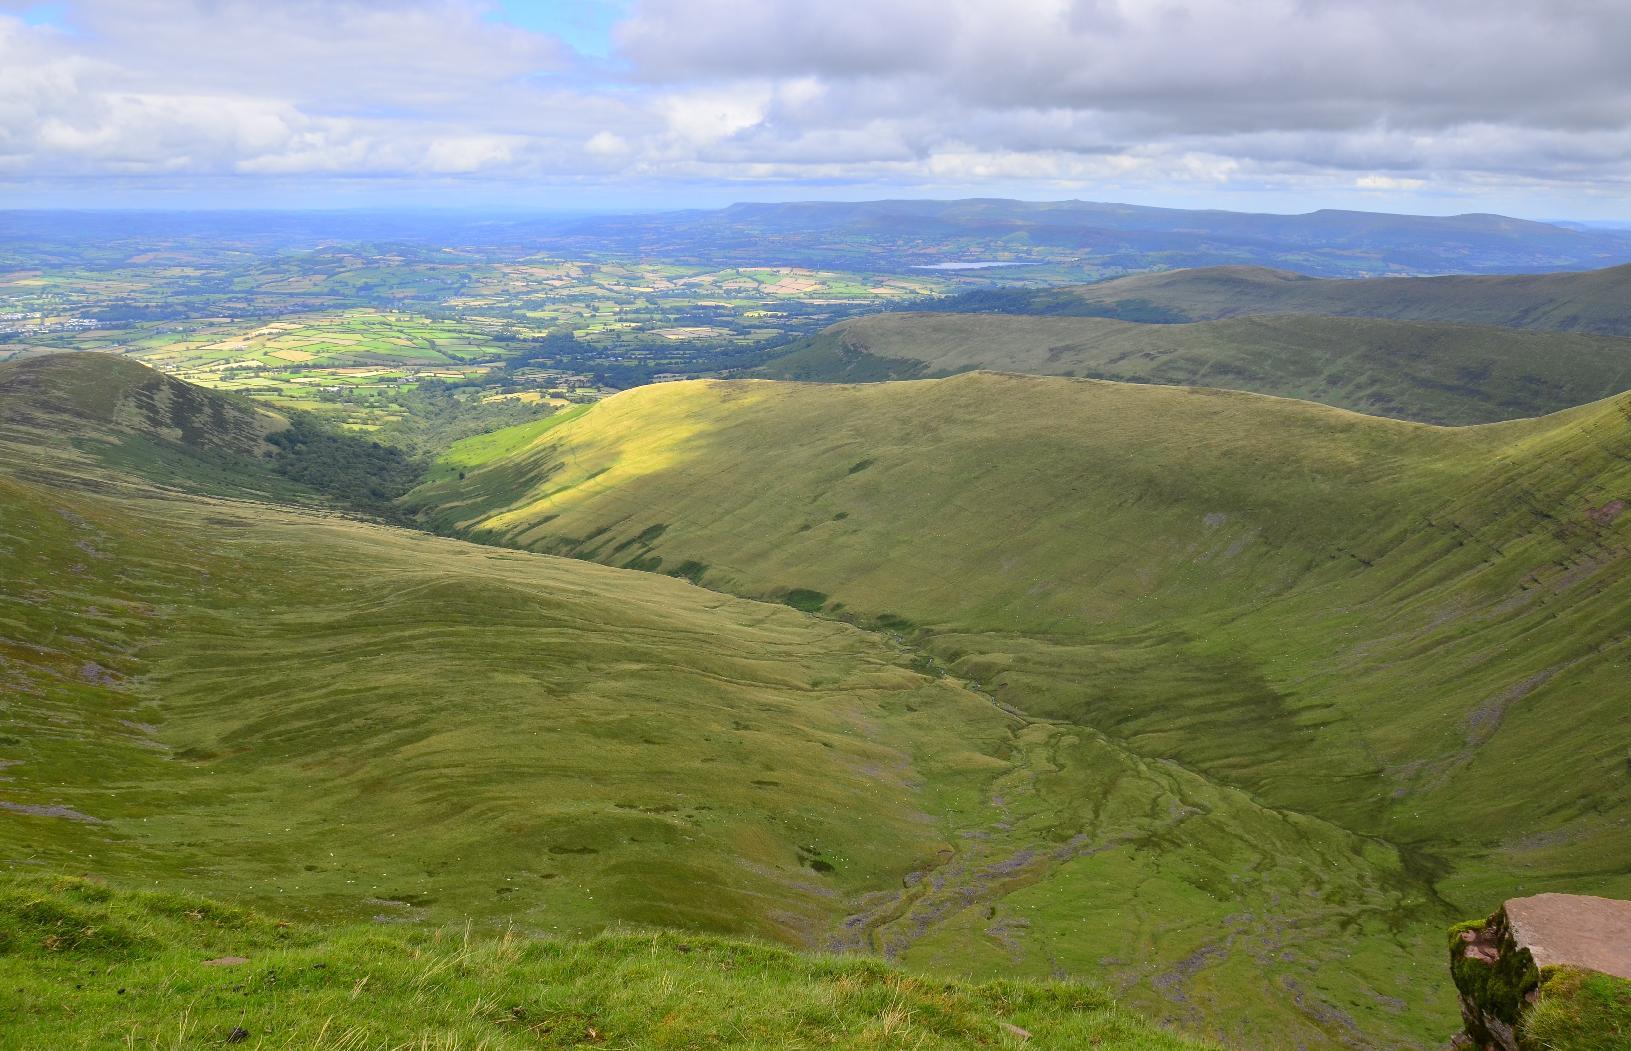 North east view from Pen Y Fan